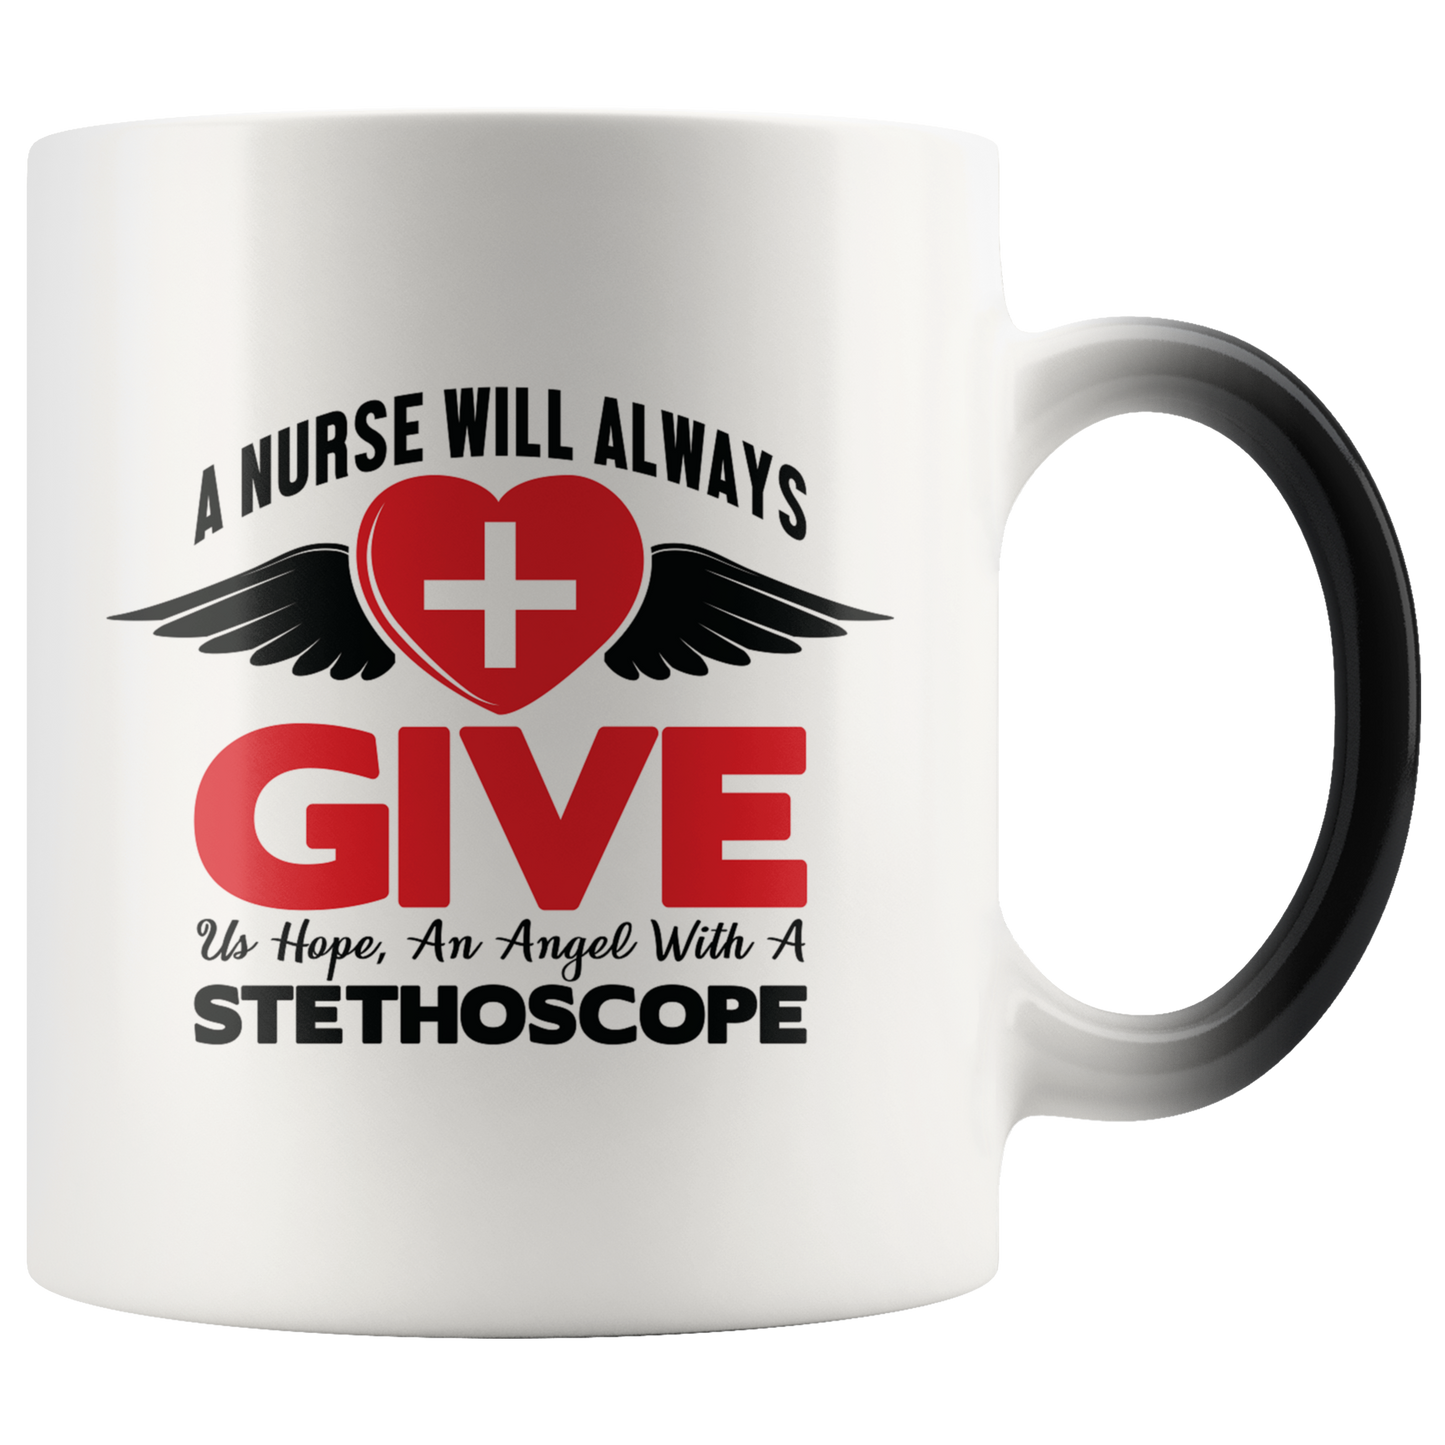 A Nurse Will Always Give - Color Changing Mug